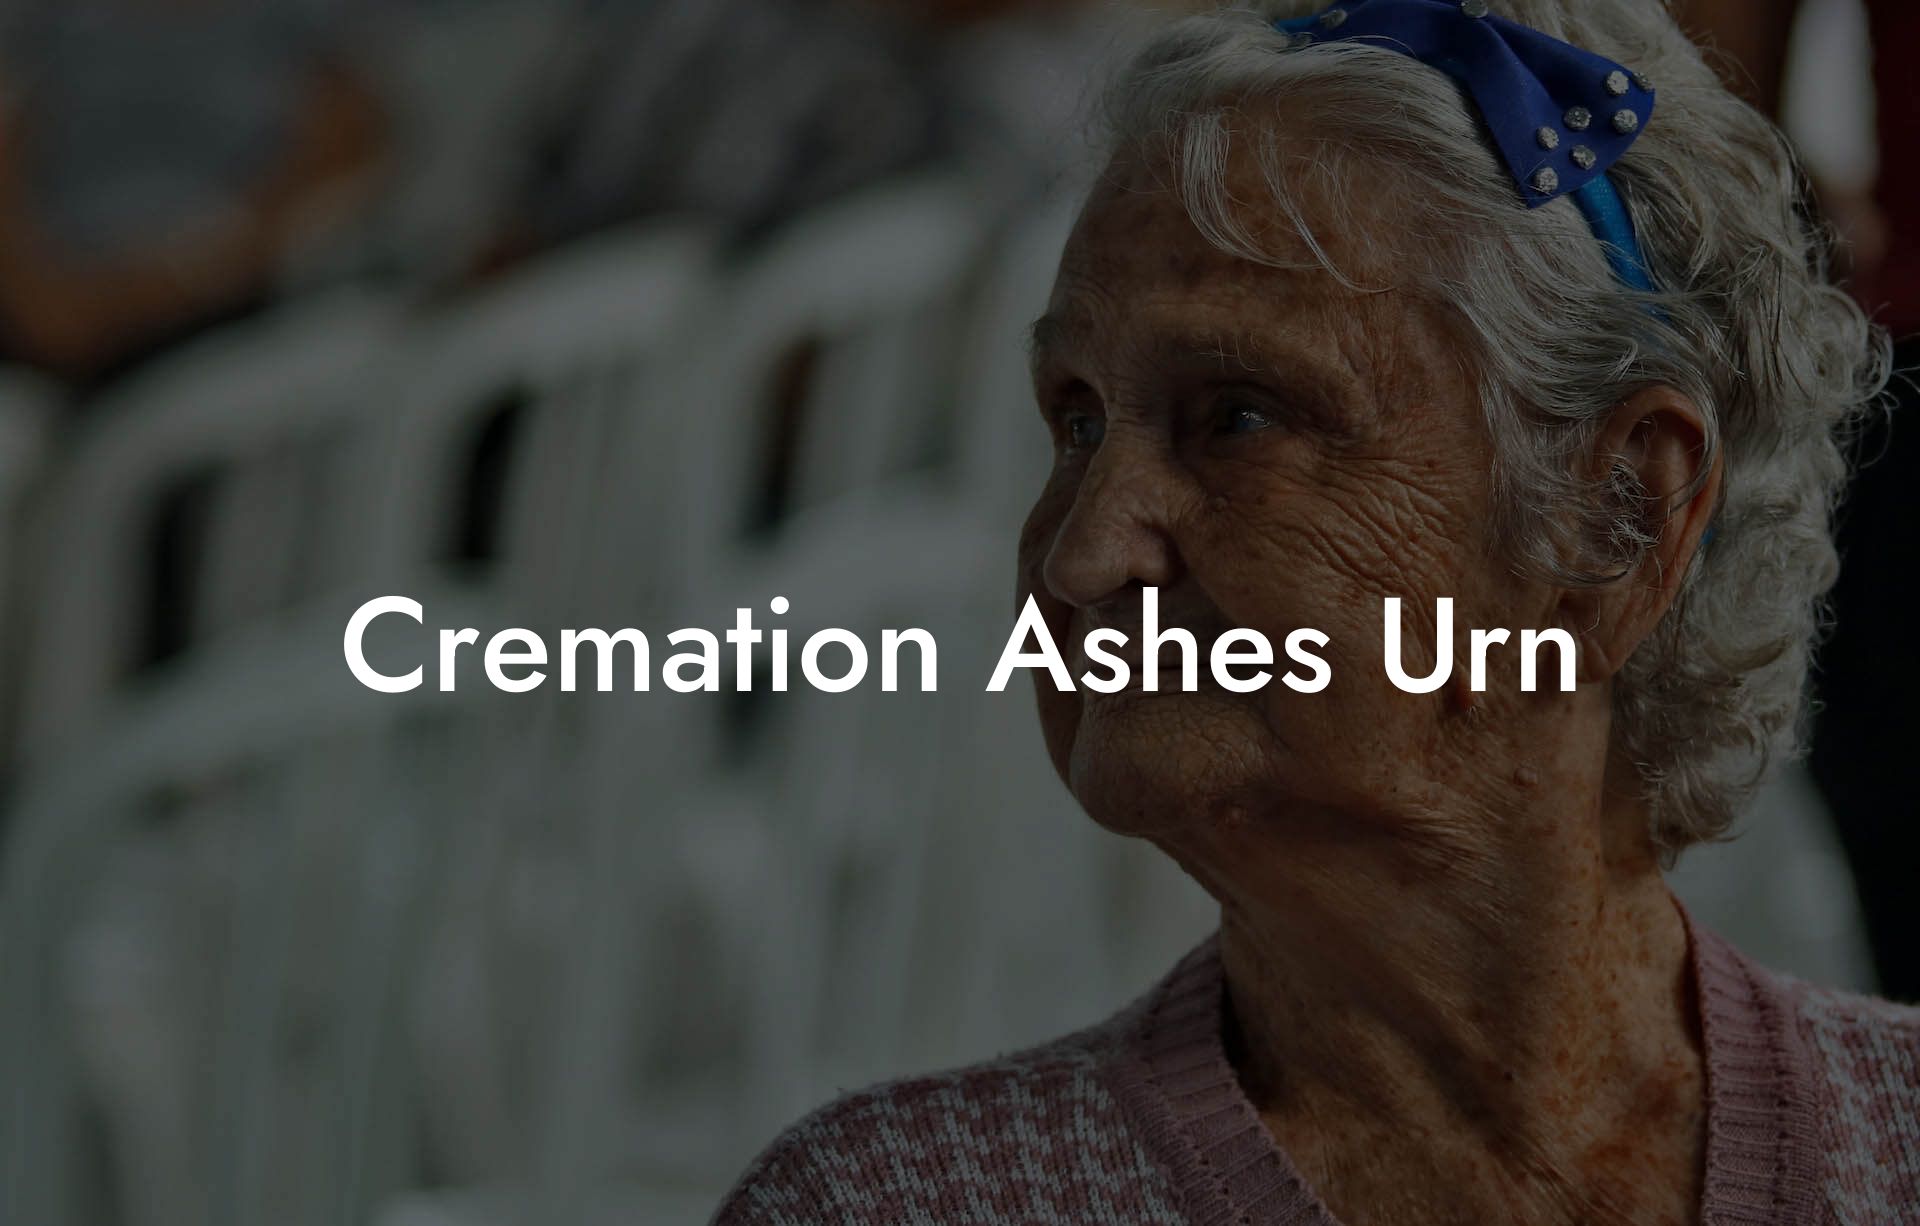 Cremation Ashes Urn